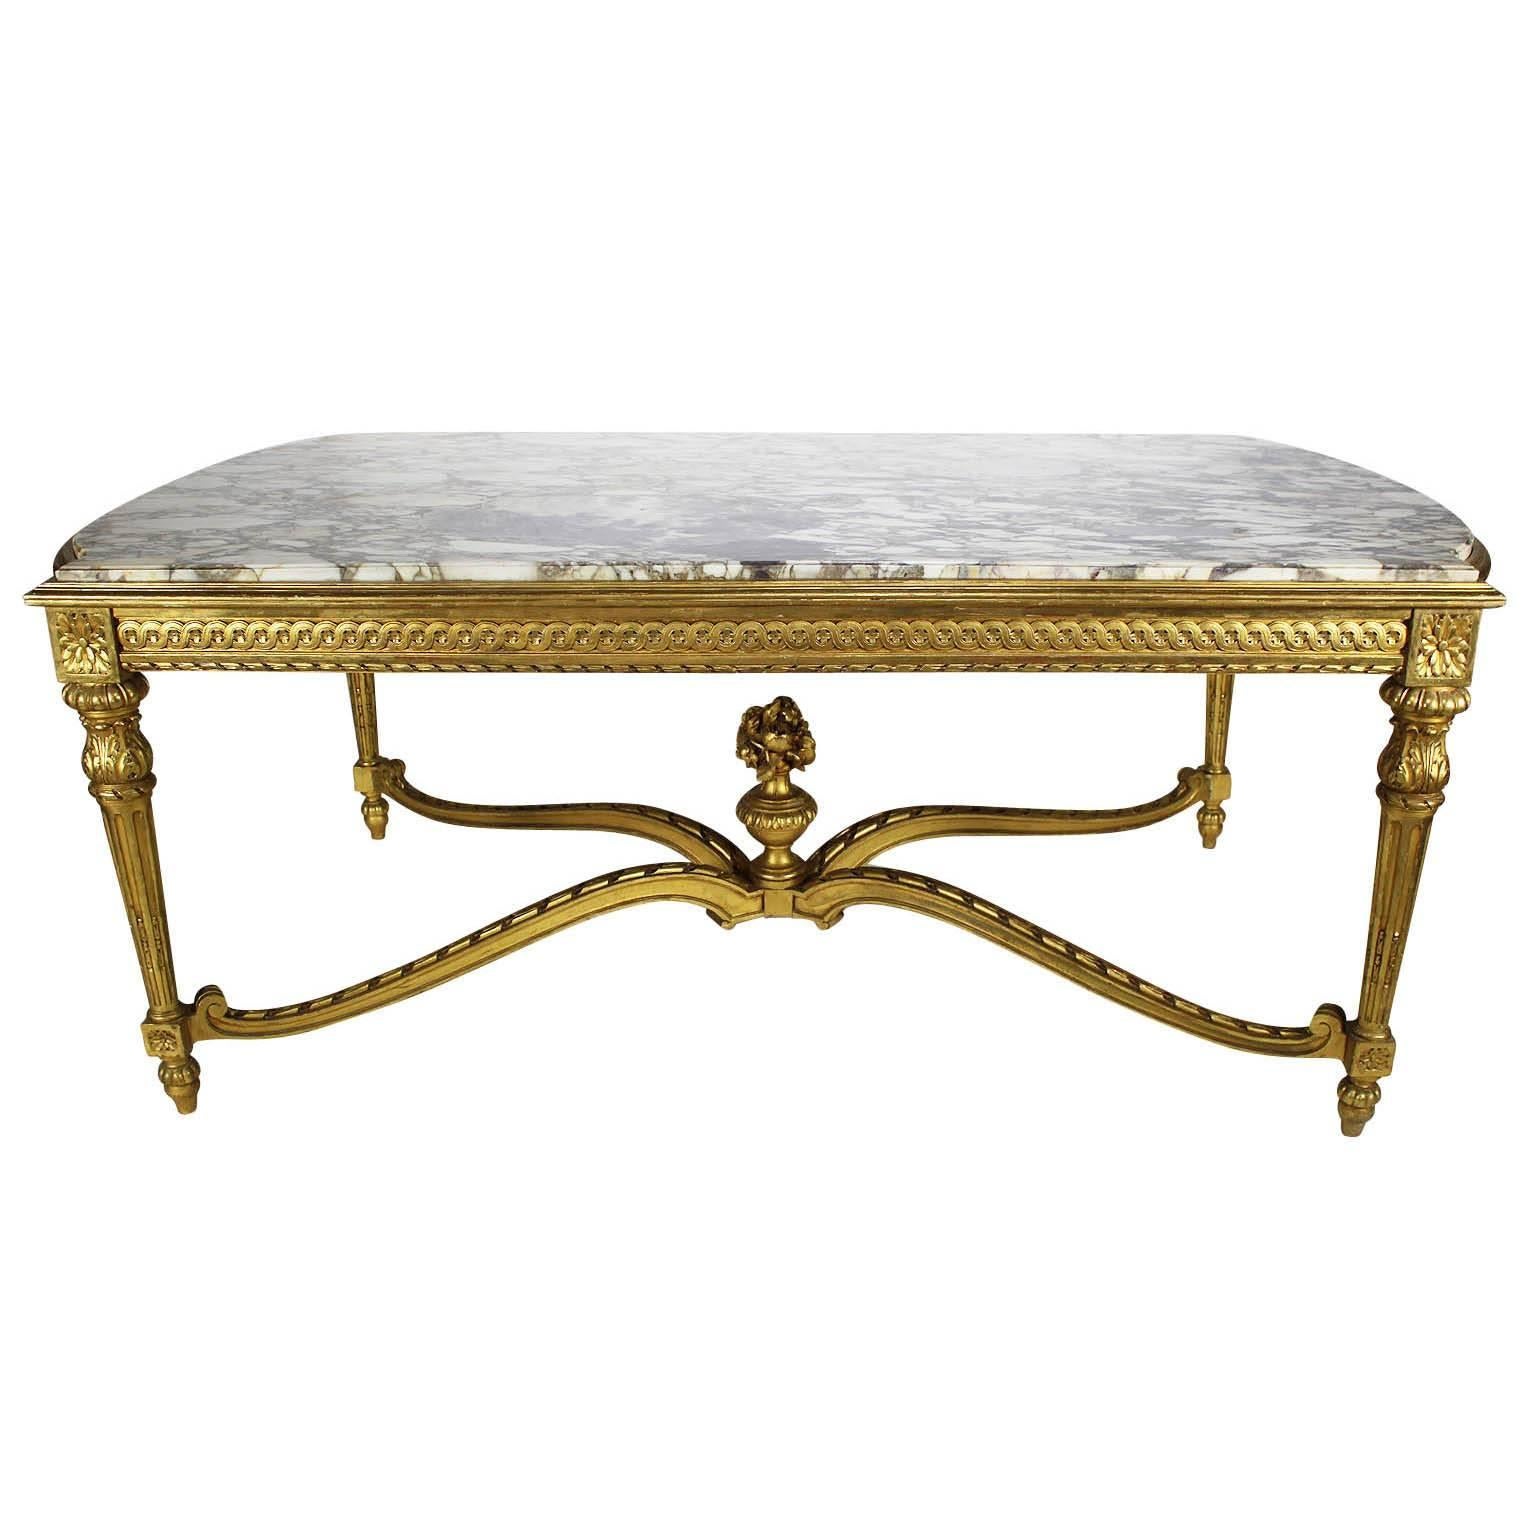 A very fine and large French 19th century Louis XVI style giltwood carved center hall table with marble top. The rectangular shaped top with rounded ends, fitted with a Brêche Violette marble top, raised on four fluted legs conjoined with an 